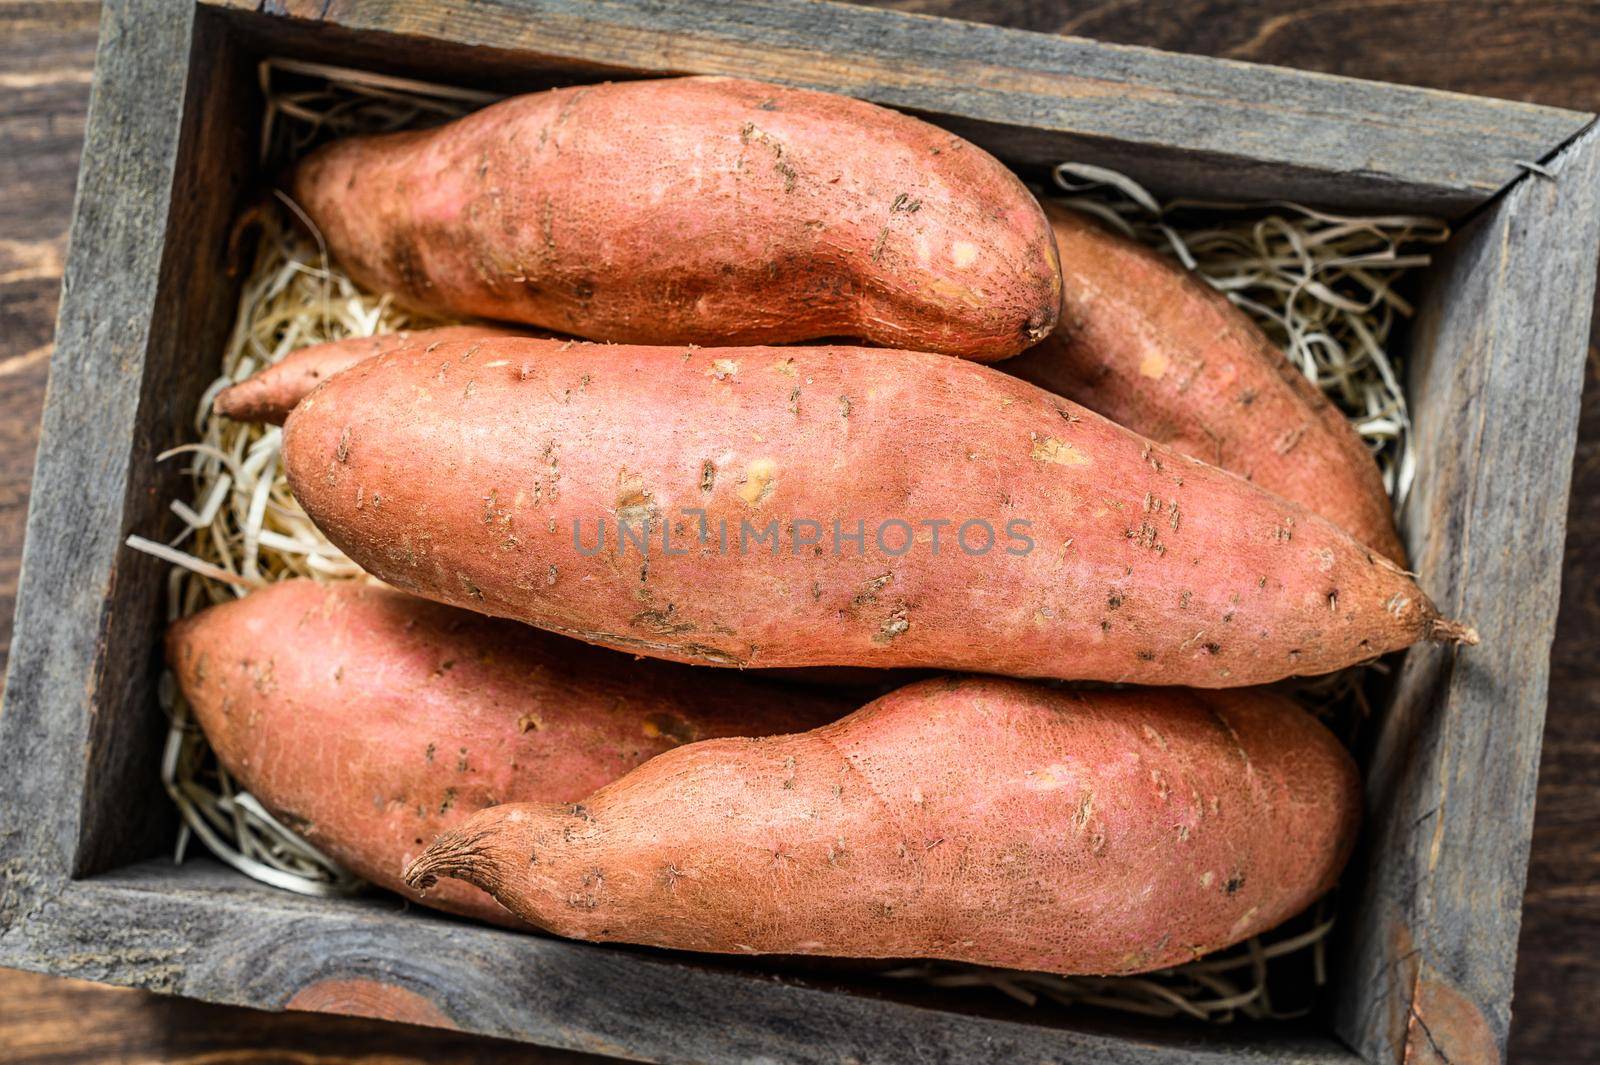 Raw batata Sweet potato on Wooden table. Wooden background. Top view.